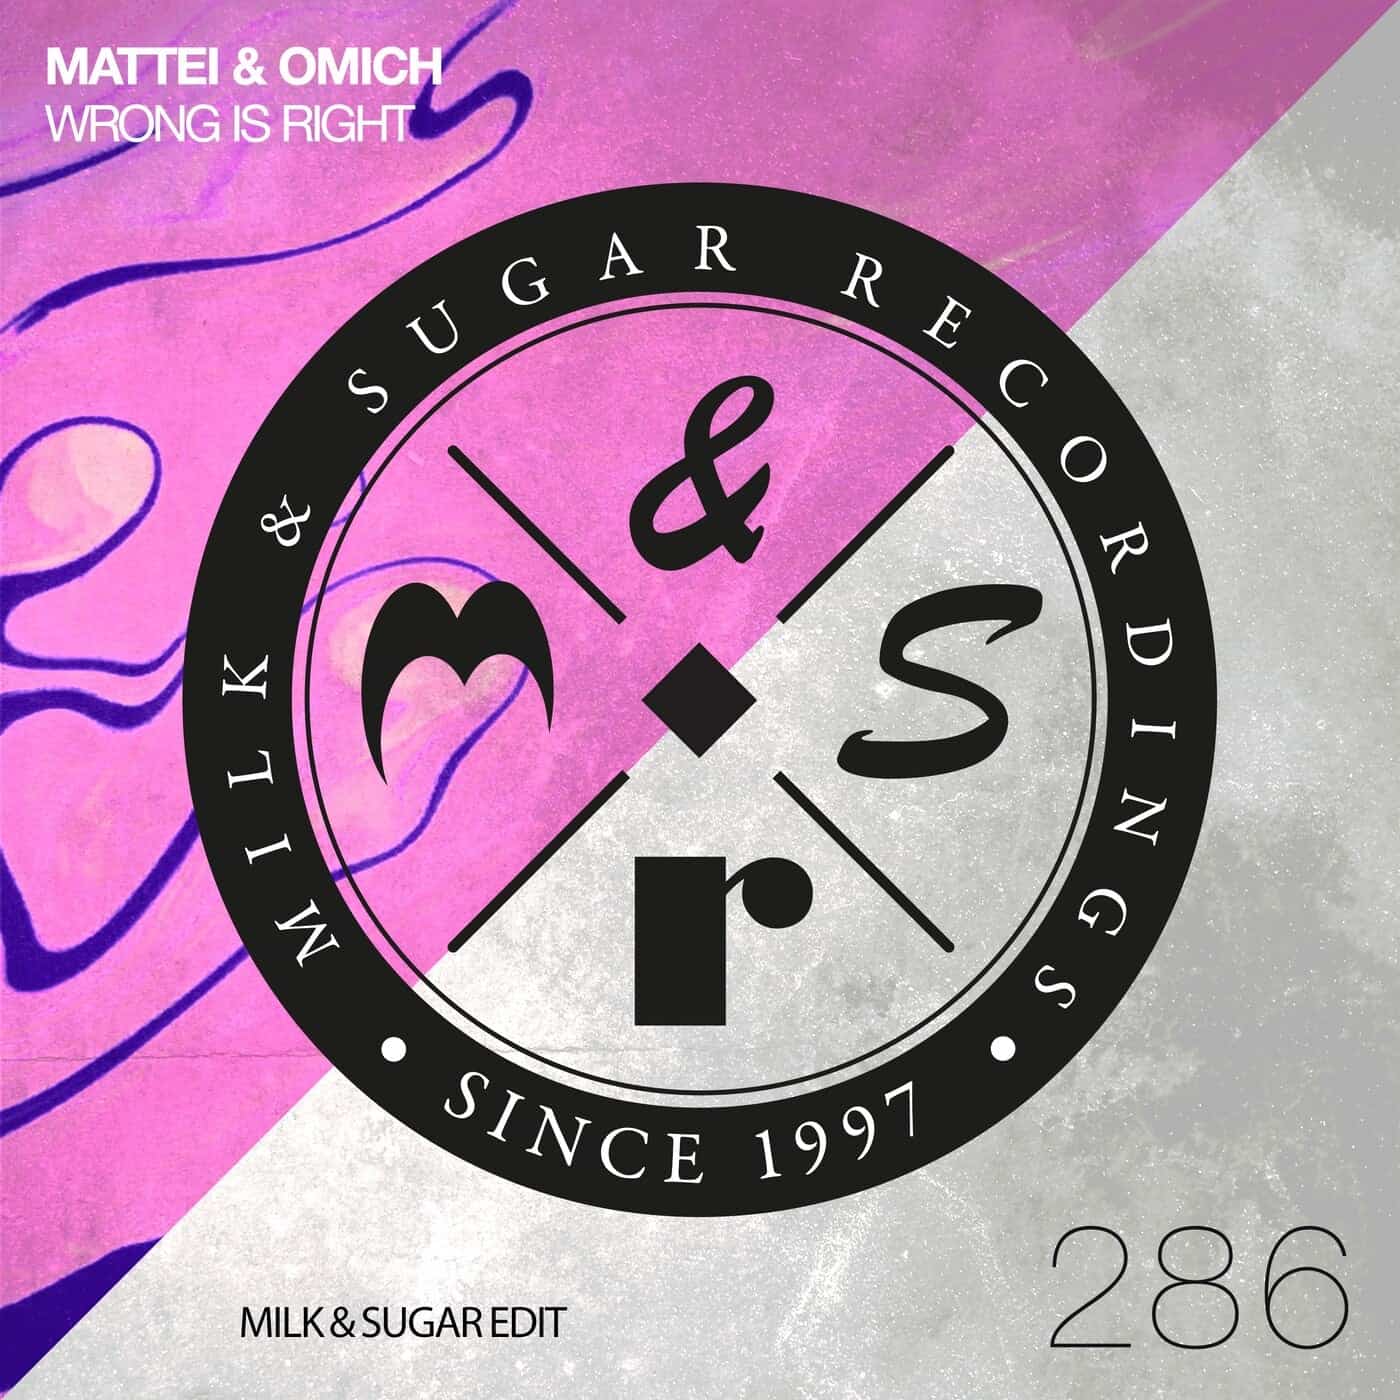 image cover: Wrong Is Right (Milk & Sugar Edit) by Mattei & Omich on Milk & Sugar